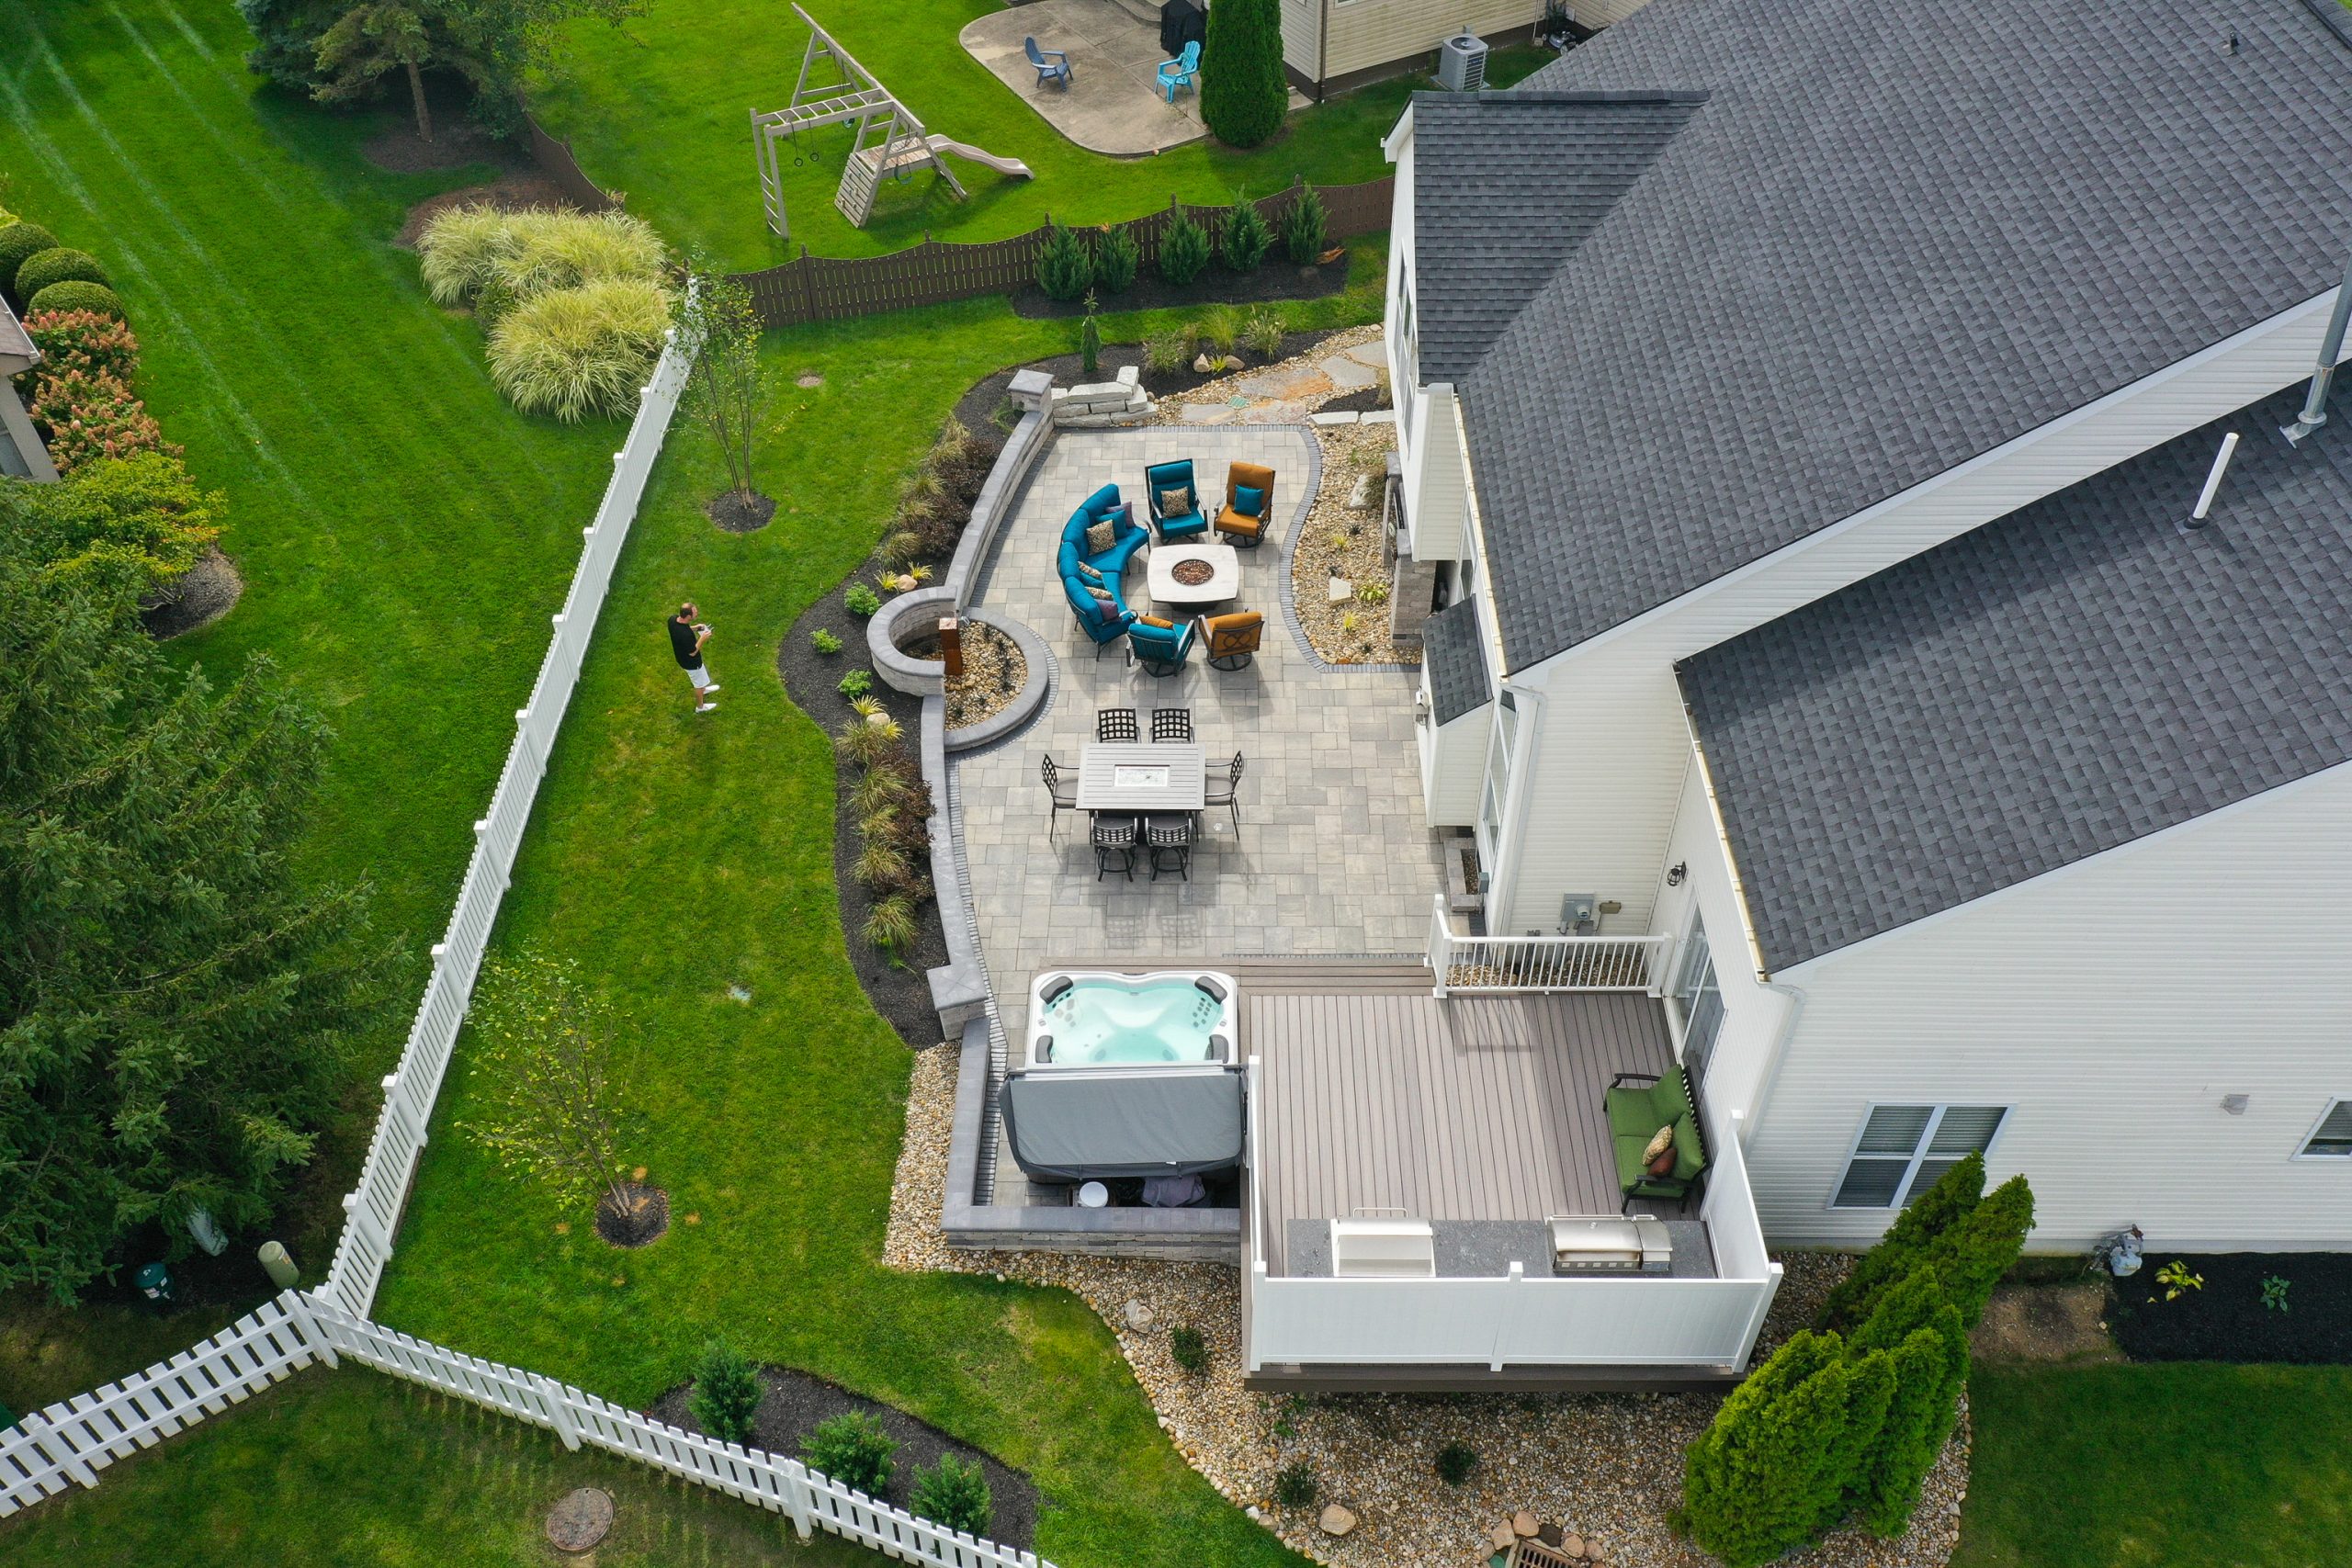 Top view of home backyard lawn within fence with a man, shrubs, lounge area, dining area and jacuzzi side-by-side a kitchen with hedges behind. Outside the fence are shrubs, trees and a playground on lawn.